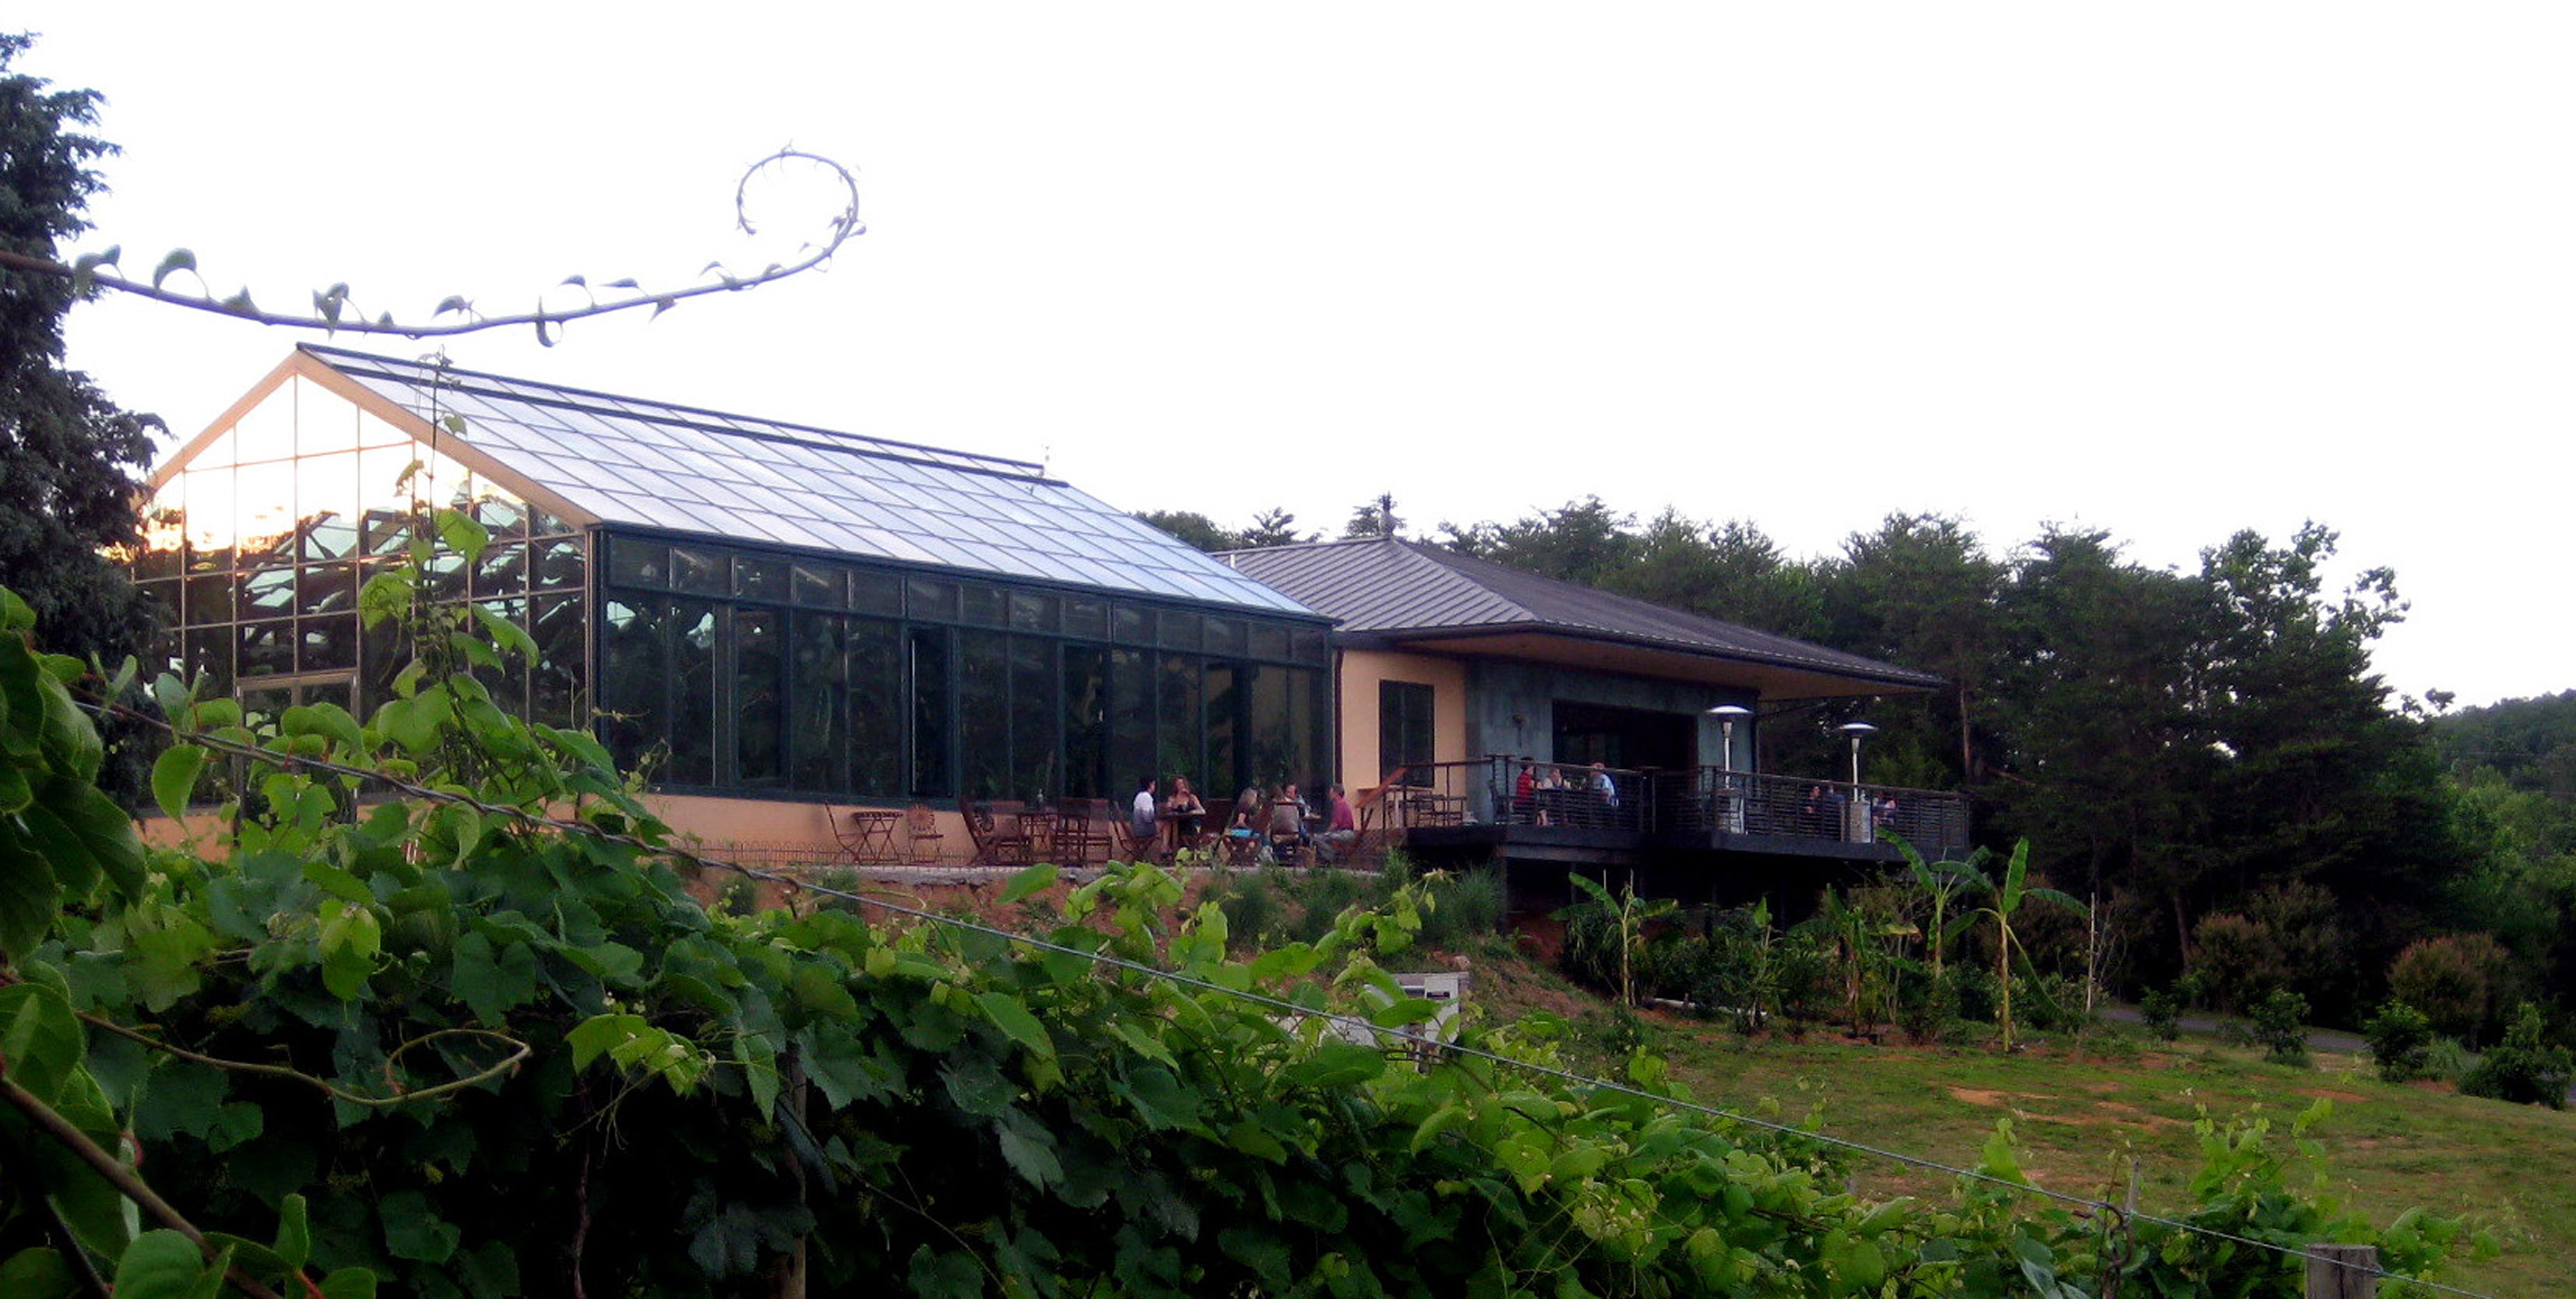 Welcome to Glass House - Glass House Winery